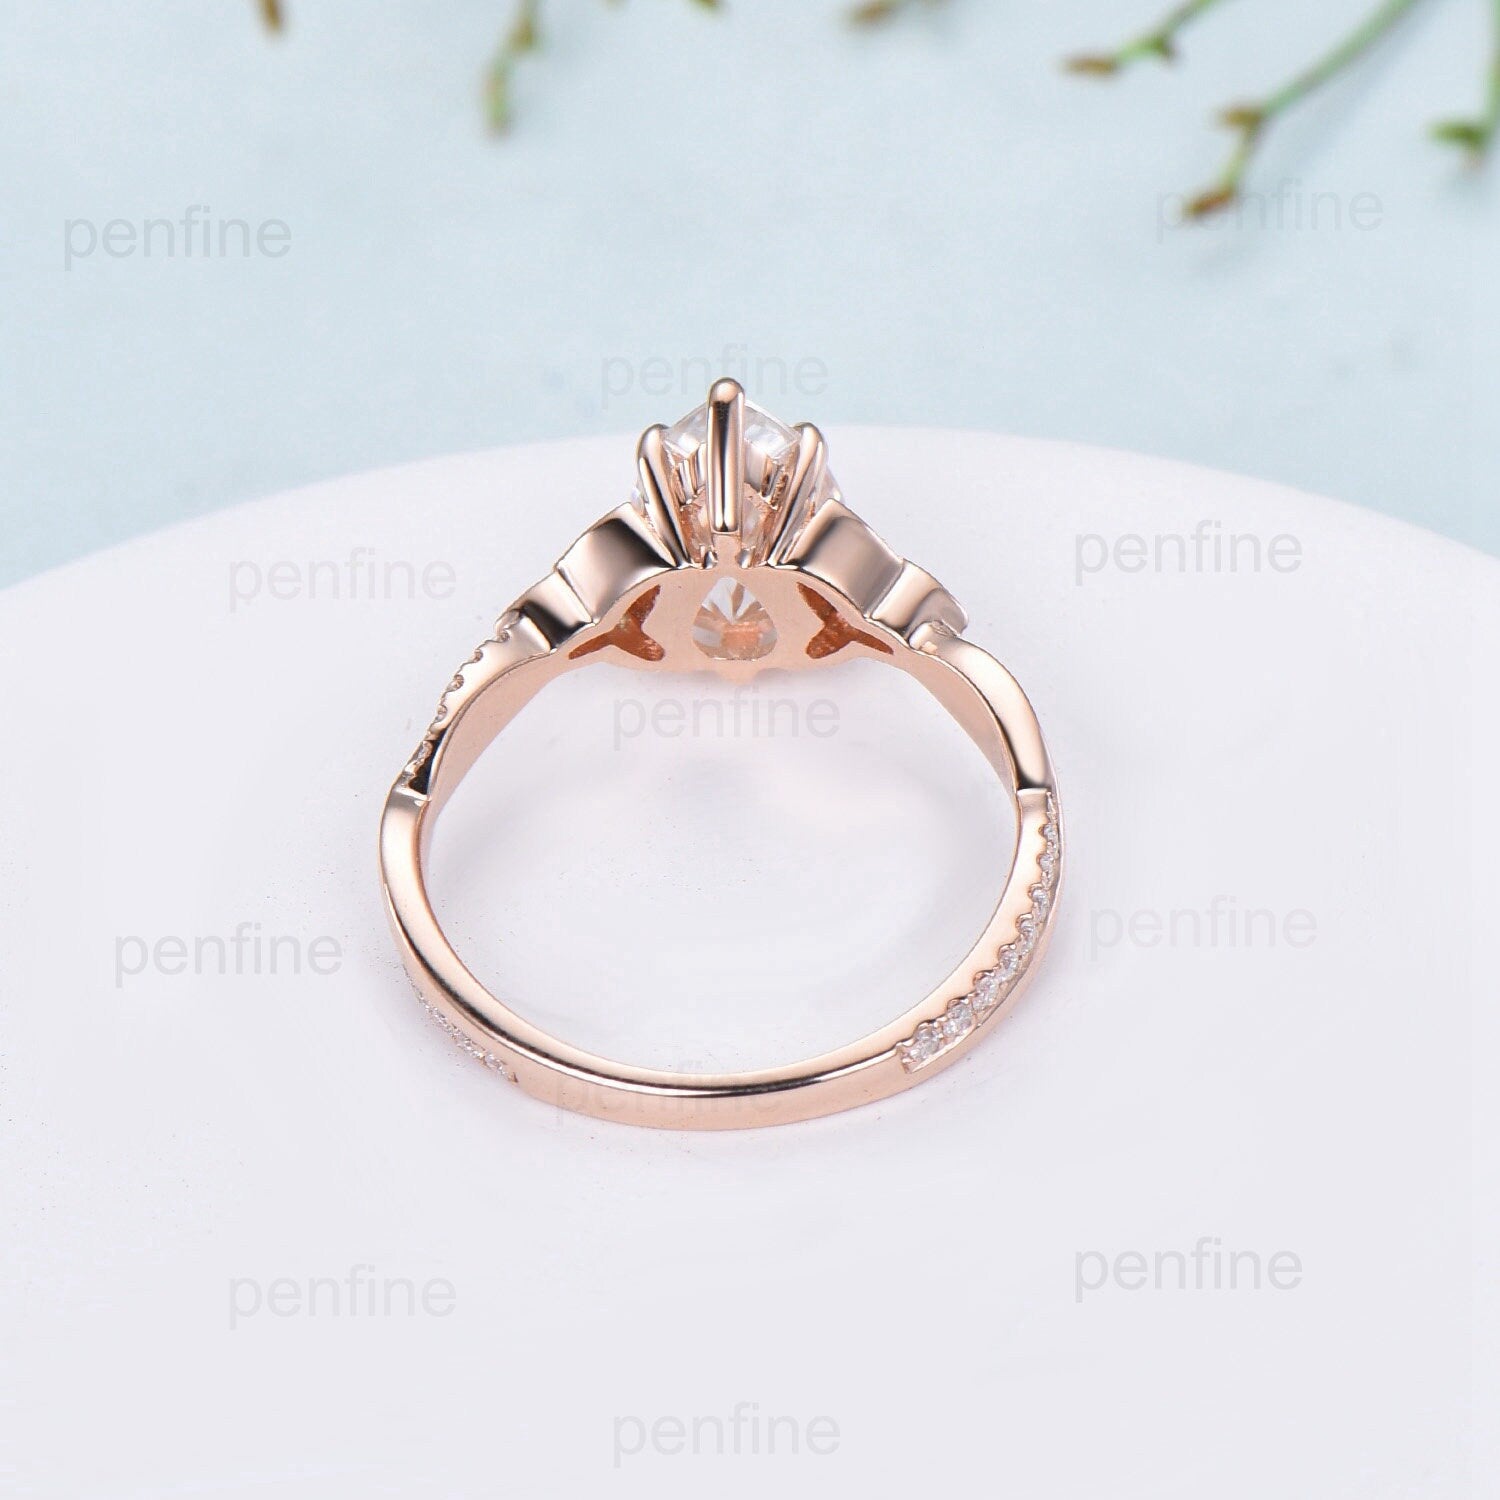 Vintage 6x9mm Pear Shaped Moissanite Engagement Ring For Women Unique Norse Viking infinity moissanite wedding ring Twig anniversary gift - PENFINE